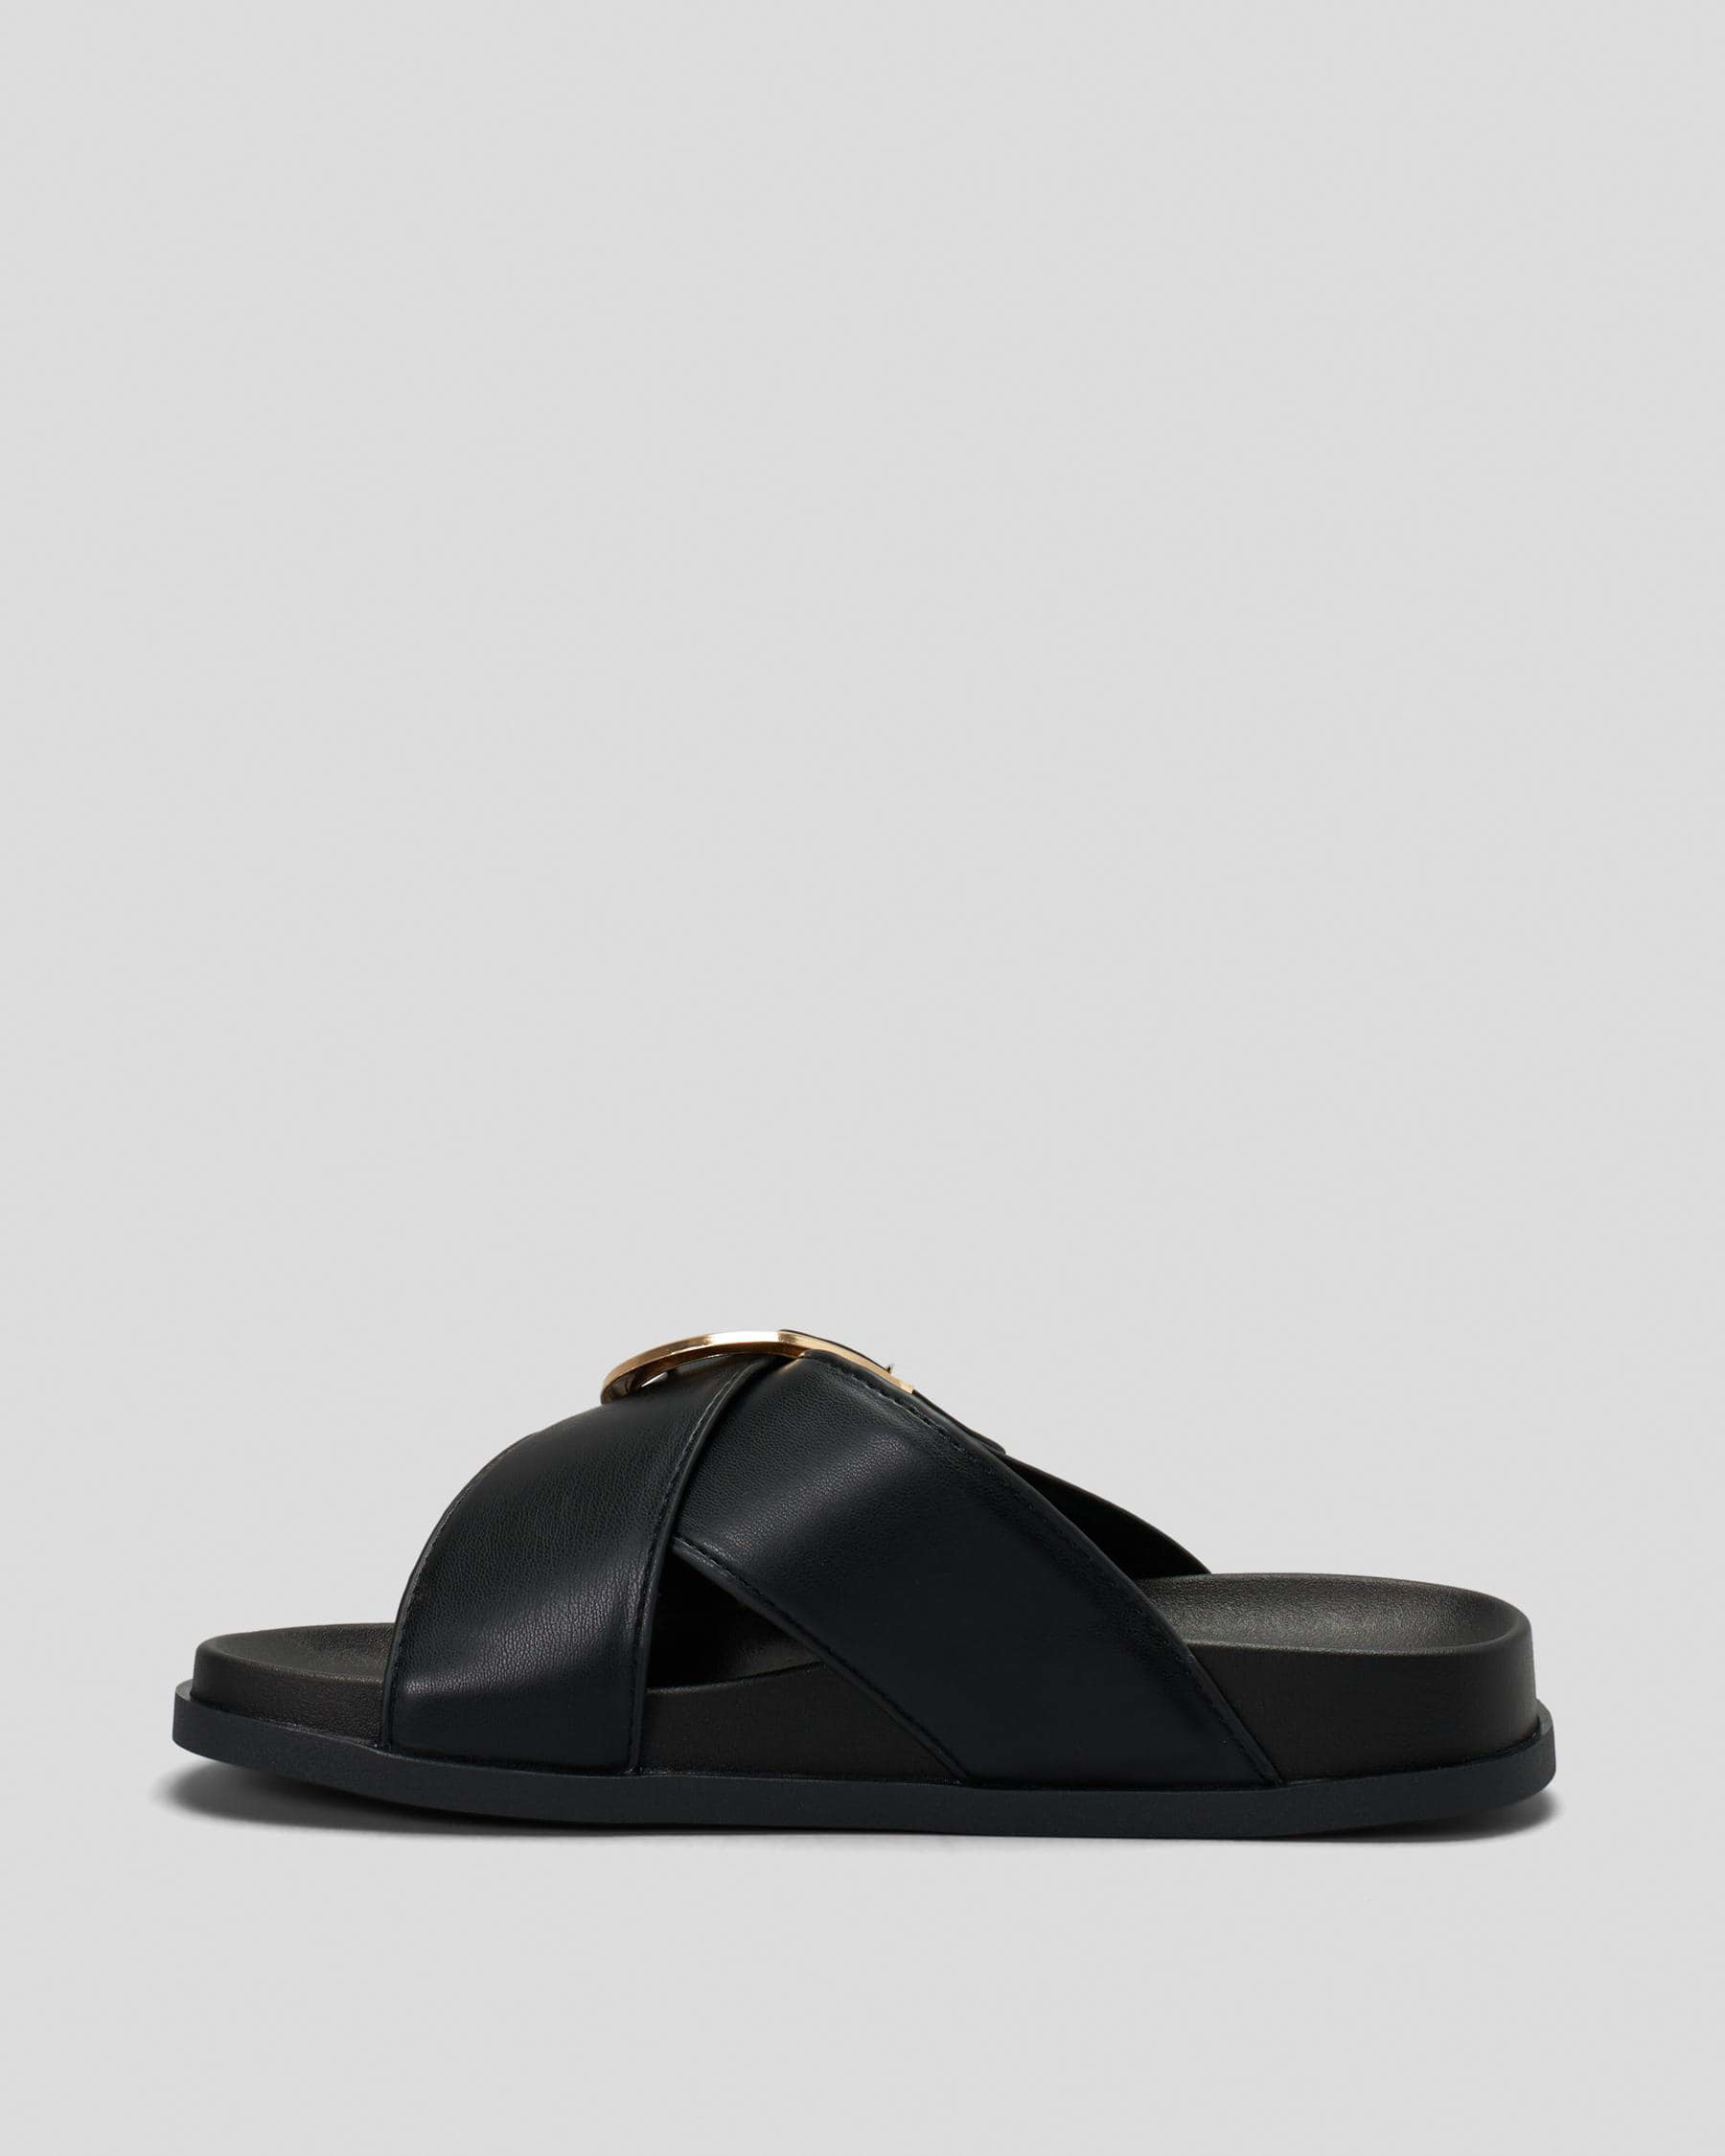 Shop Ava And Ever Prague Slide Sandals In Black - Fast Shipping & Easy ...